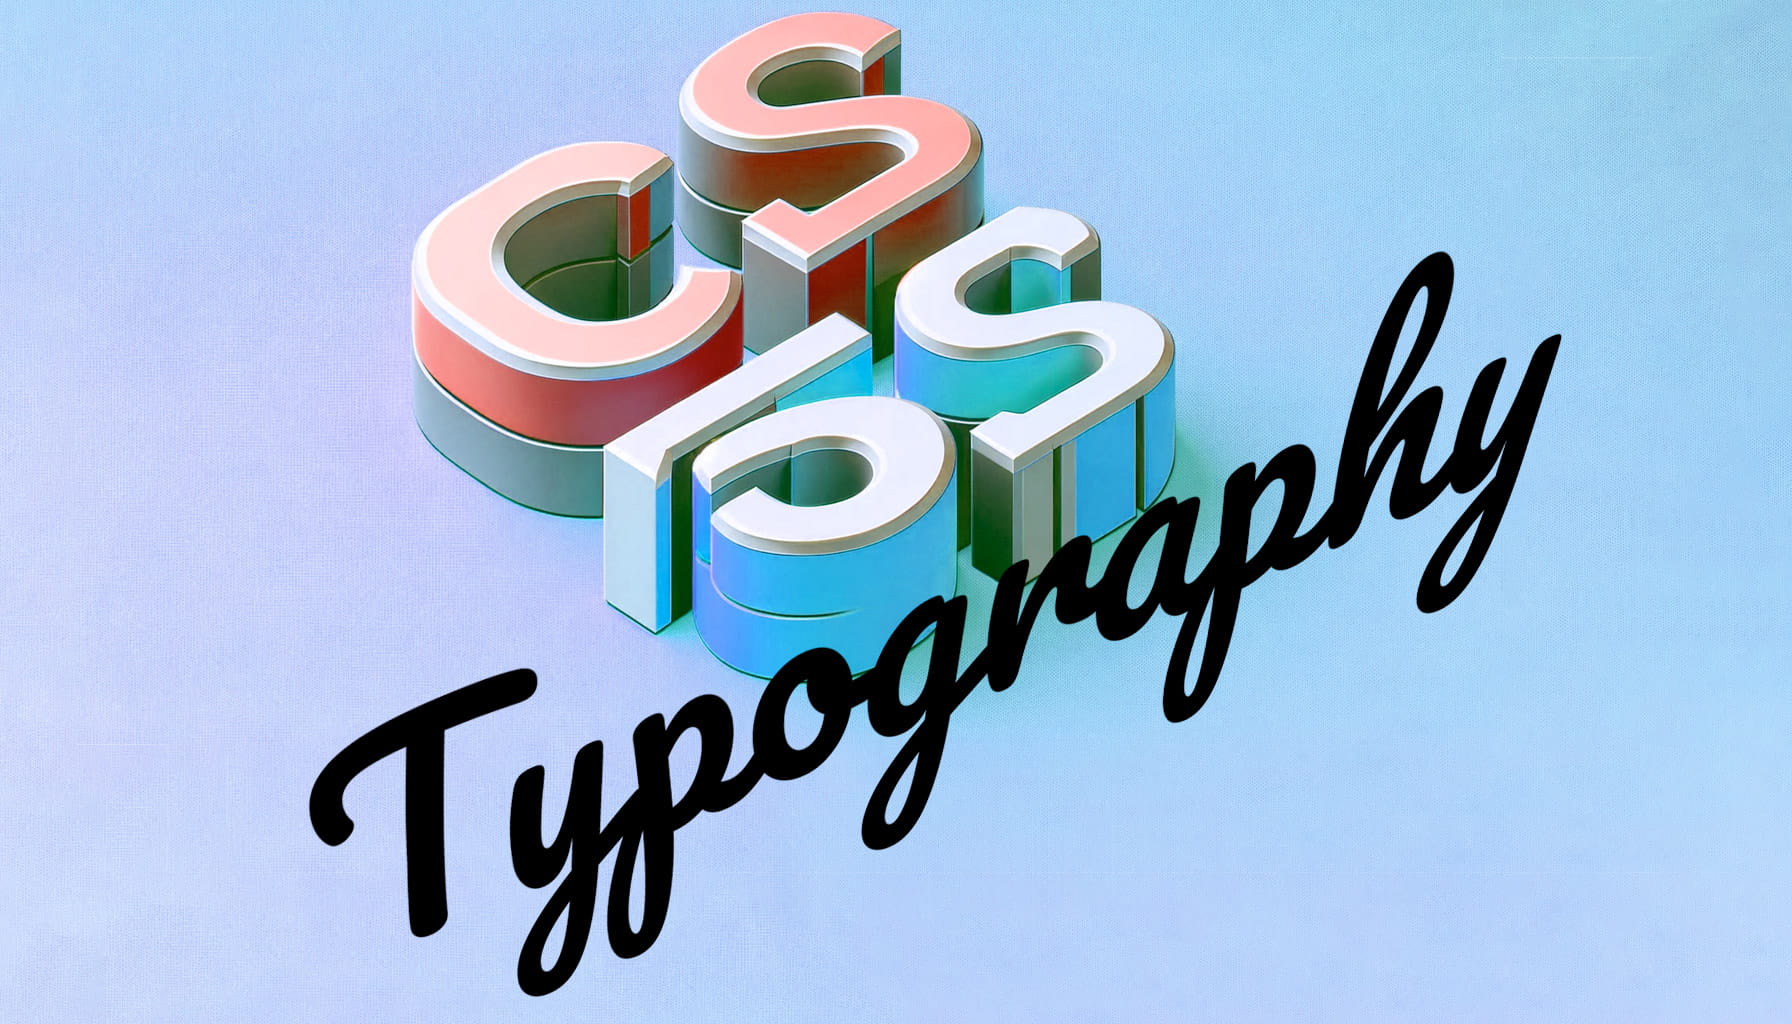 Doing Fluid Typography for Responsive Designs